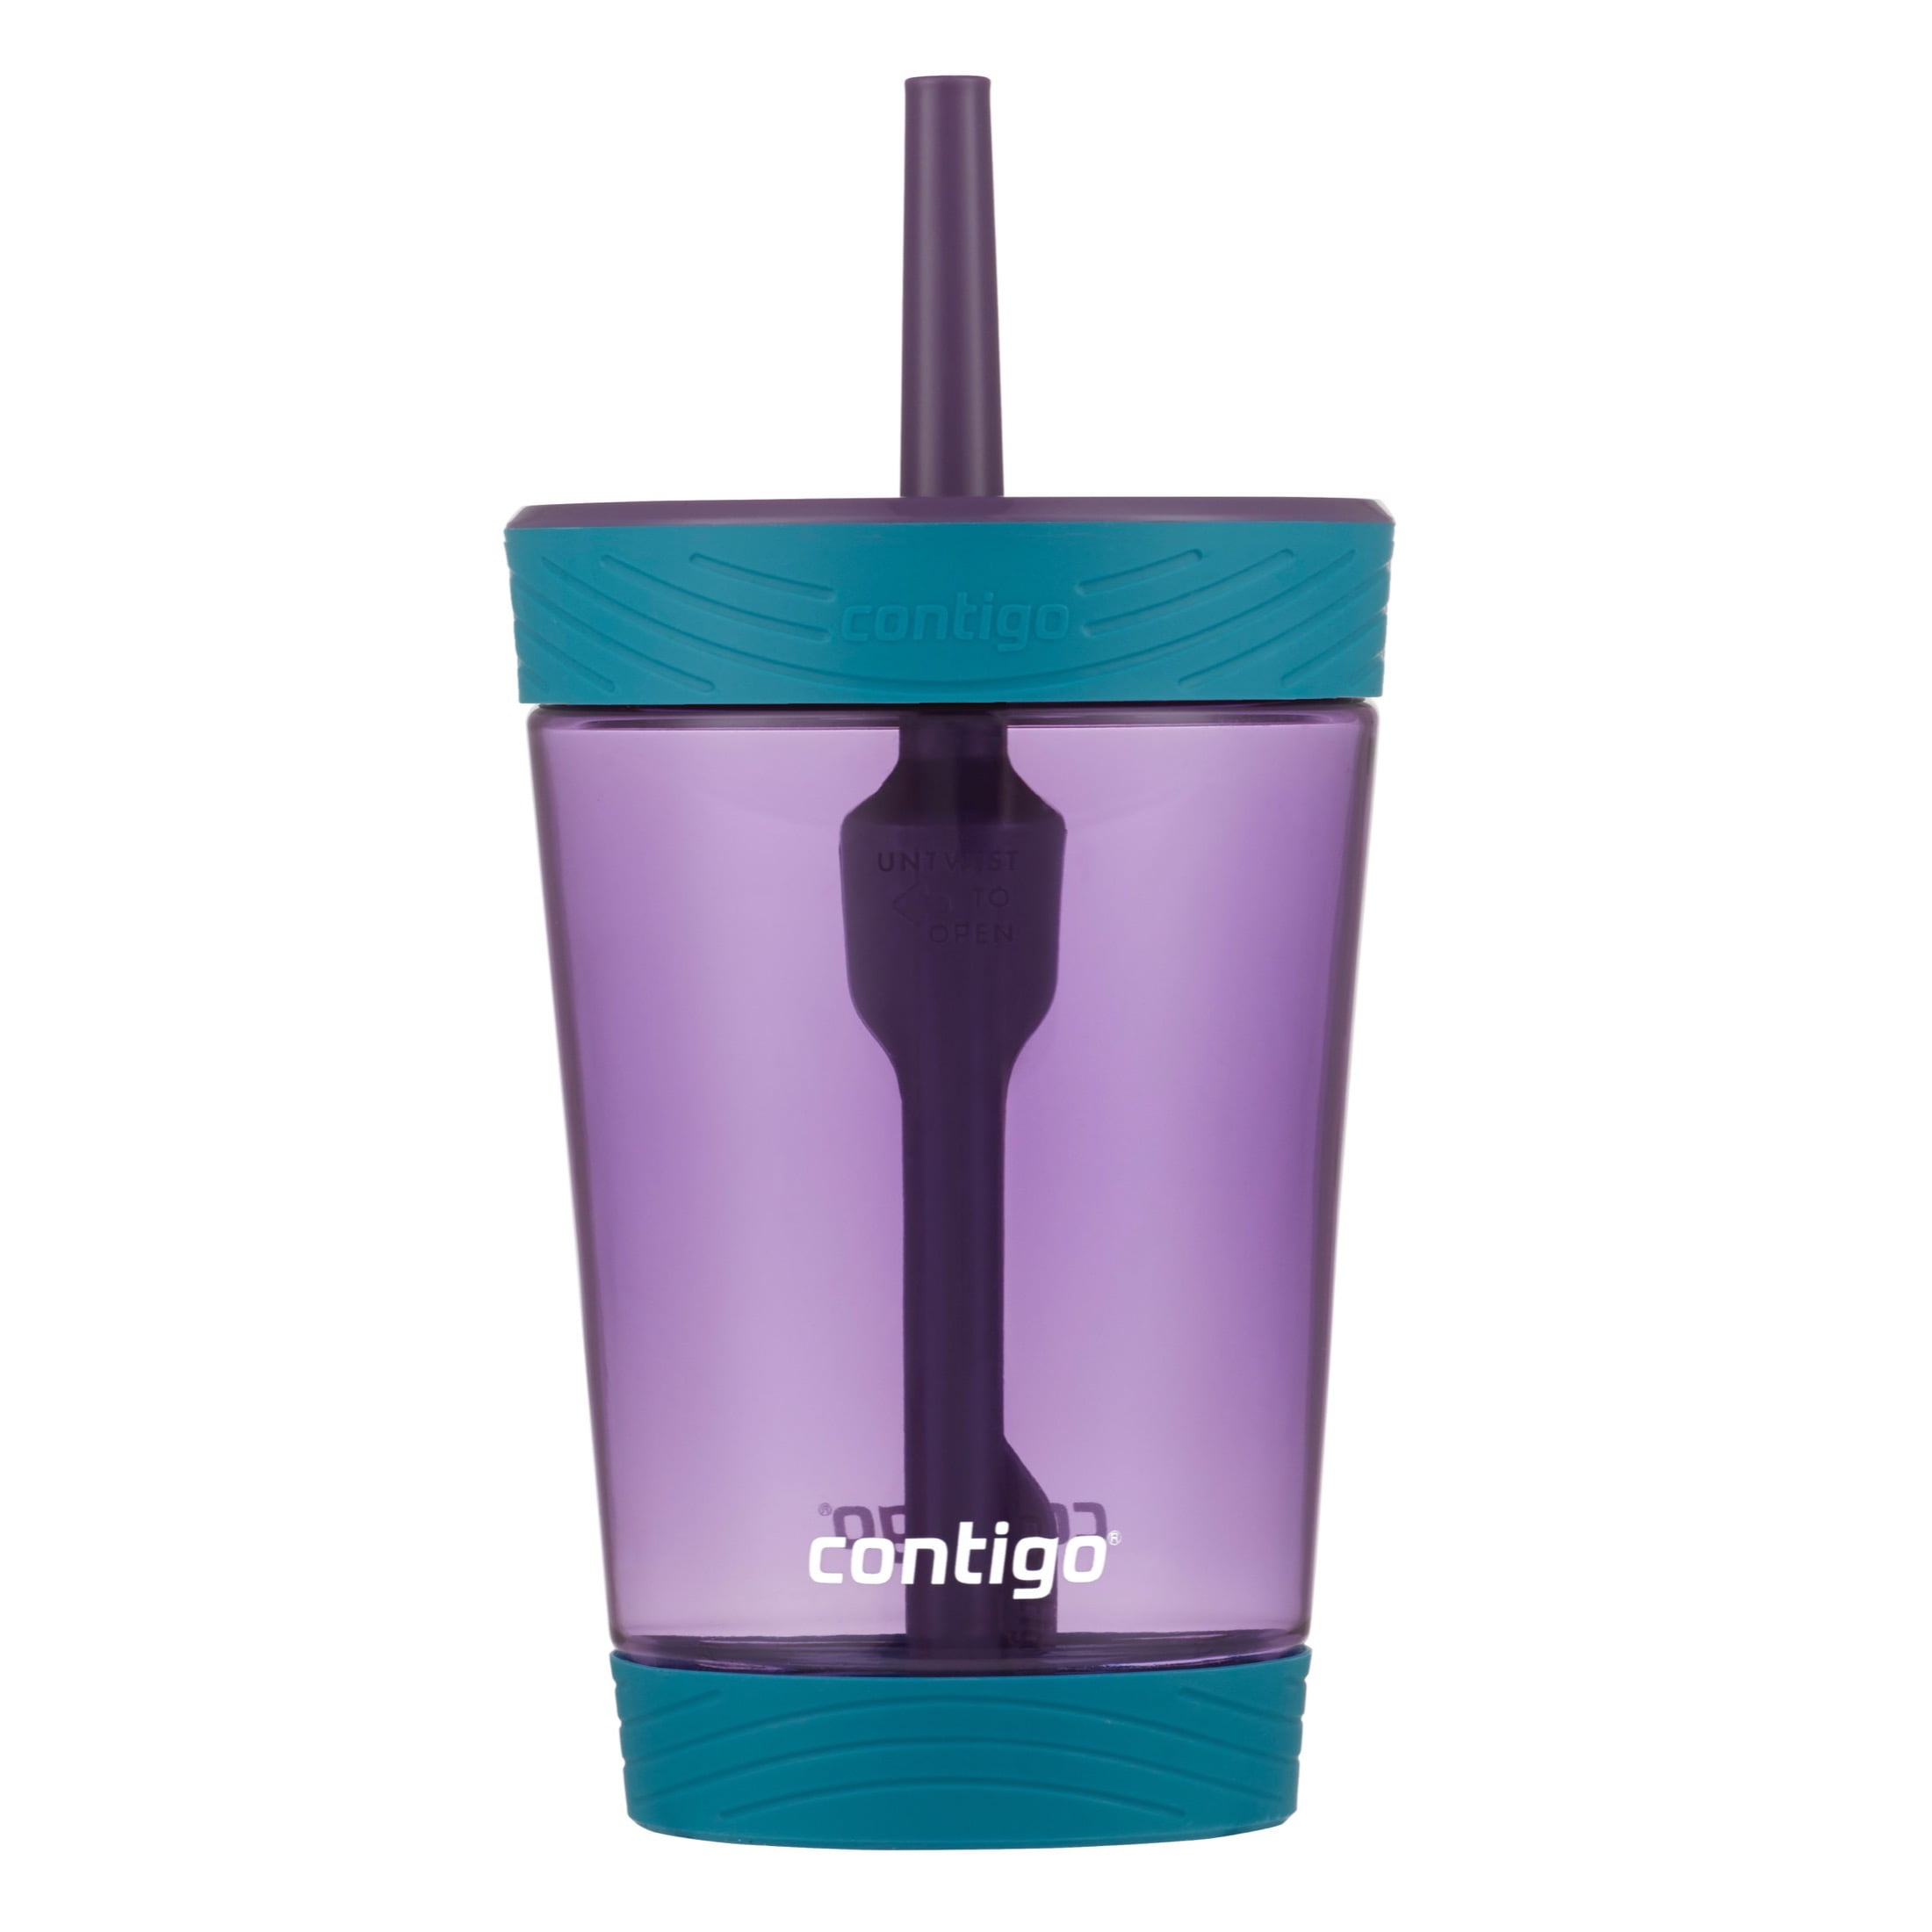 Contigo Kids Spill-Proof 14oz Tumbler with Straw and BPA-Free Plastic, Fits  Most Cup Holders and Dishwasher Safe, Nautical Fish